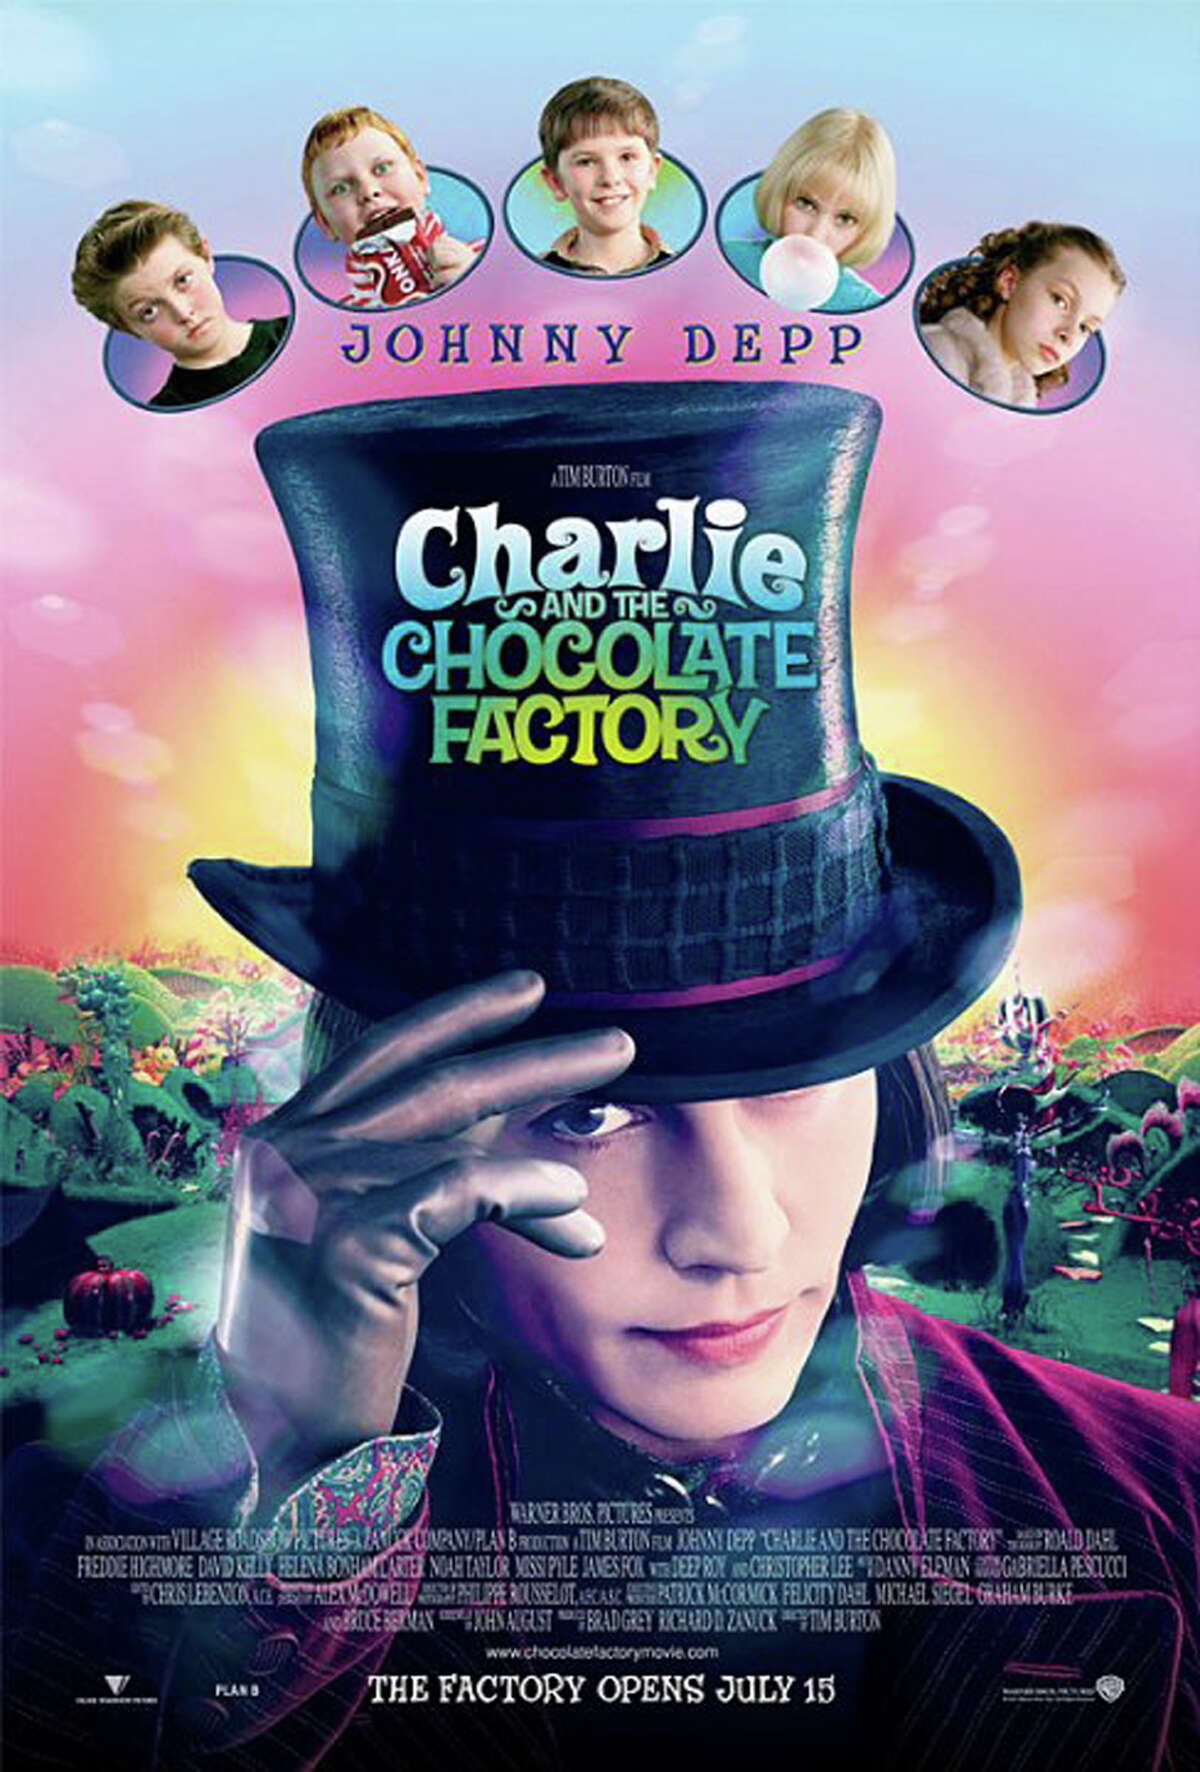 Of the two films based on Roald Dahlís ìCharlie and the Chocolate Factoryî, the Johnny Depp version (2005), above,"is truer to the original story, and definitely has some cool visual effects - but the 1971 version starring Gene Wilder is my favorite," says Greenwich Library's Kate Petrov.